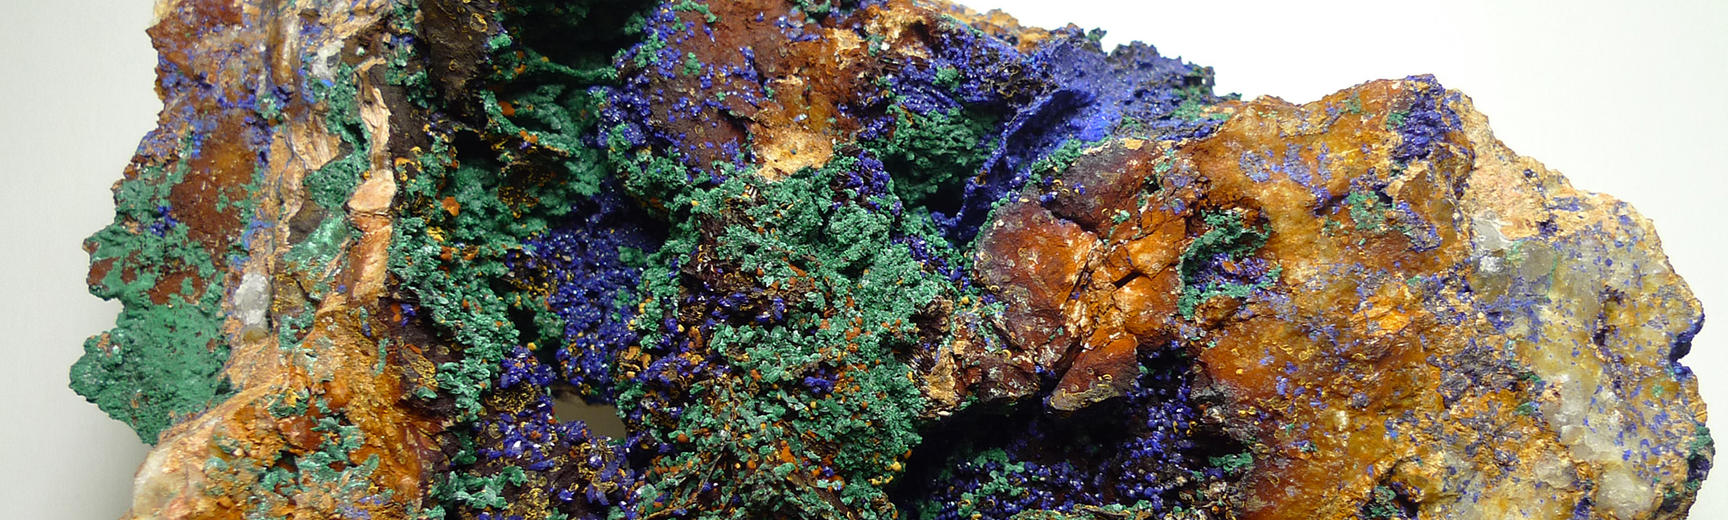 Rock with colourful minerals